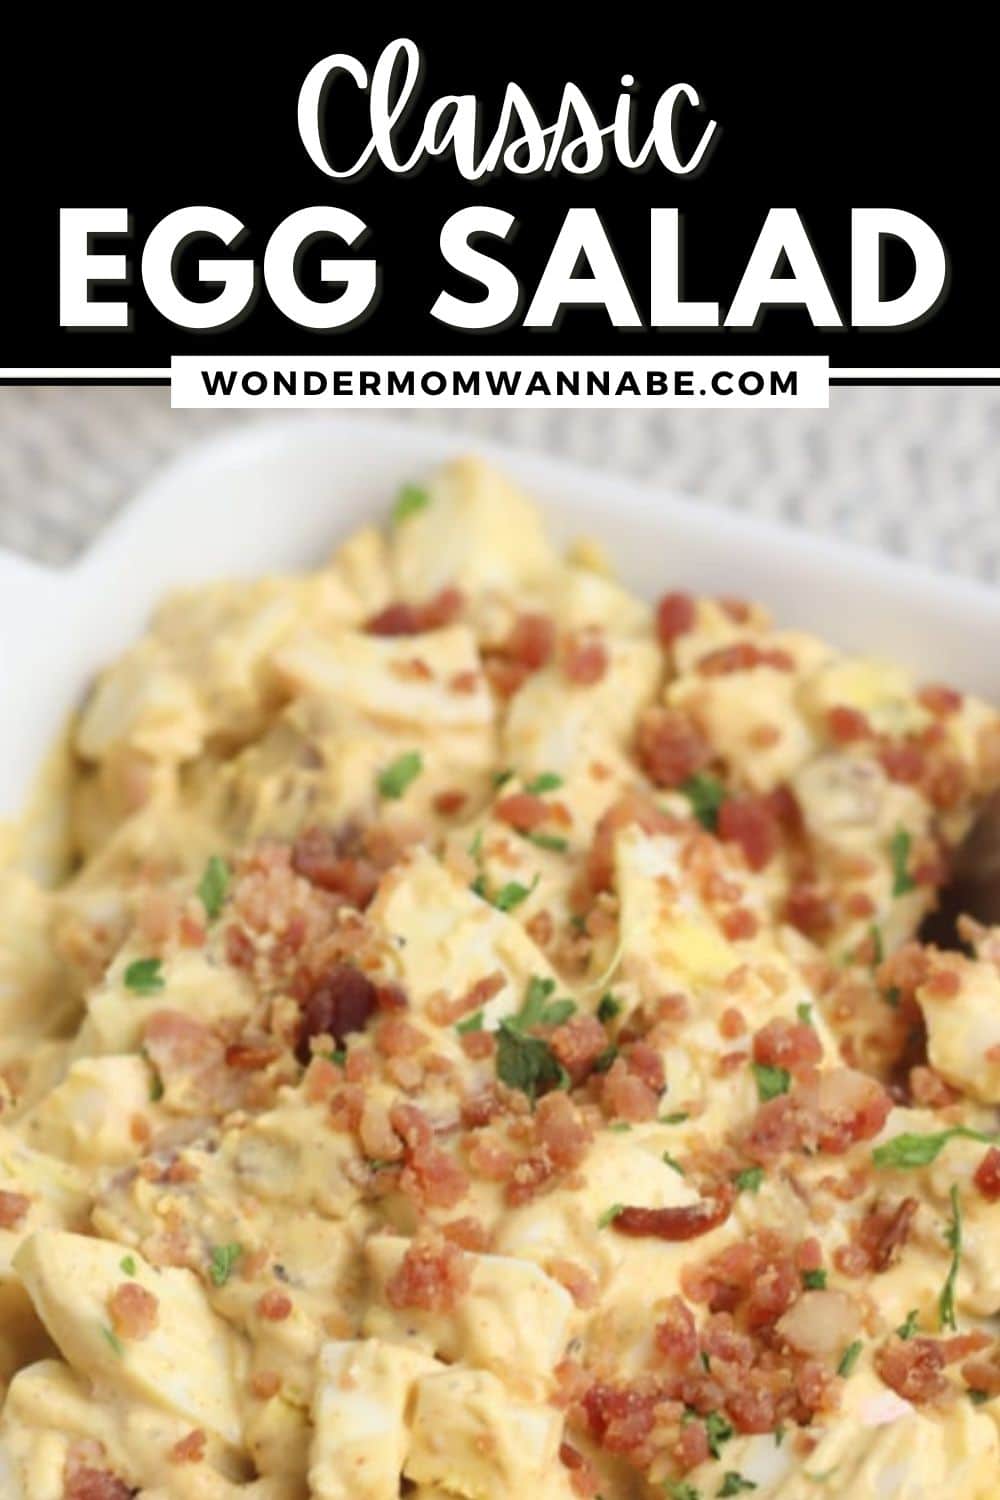 A bowl of classic egg salad topped with bacon bits and garnished with fresh herbs, with the text "classic egg salad recipe" and the website "wondermomwannabe.com" displayed above